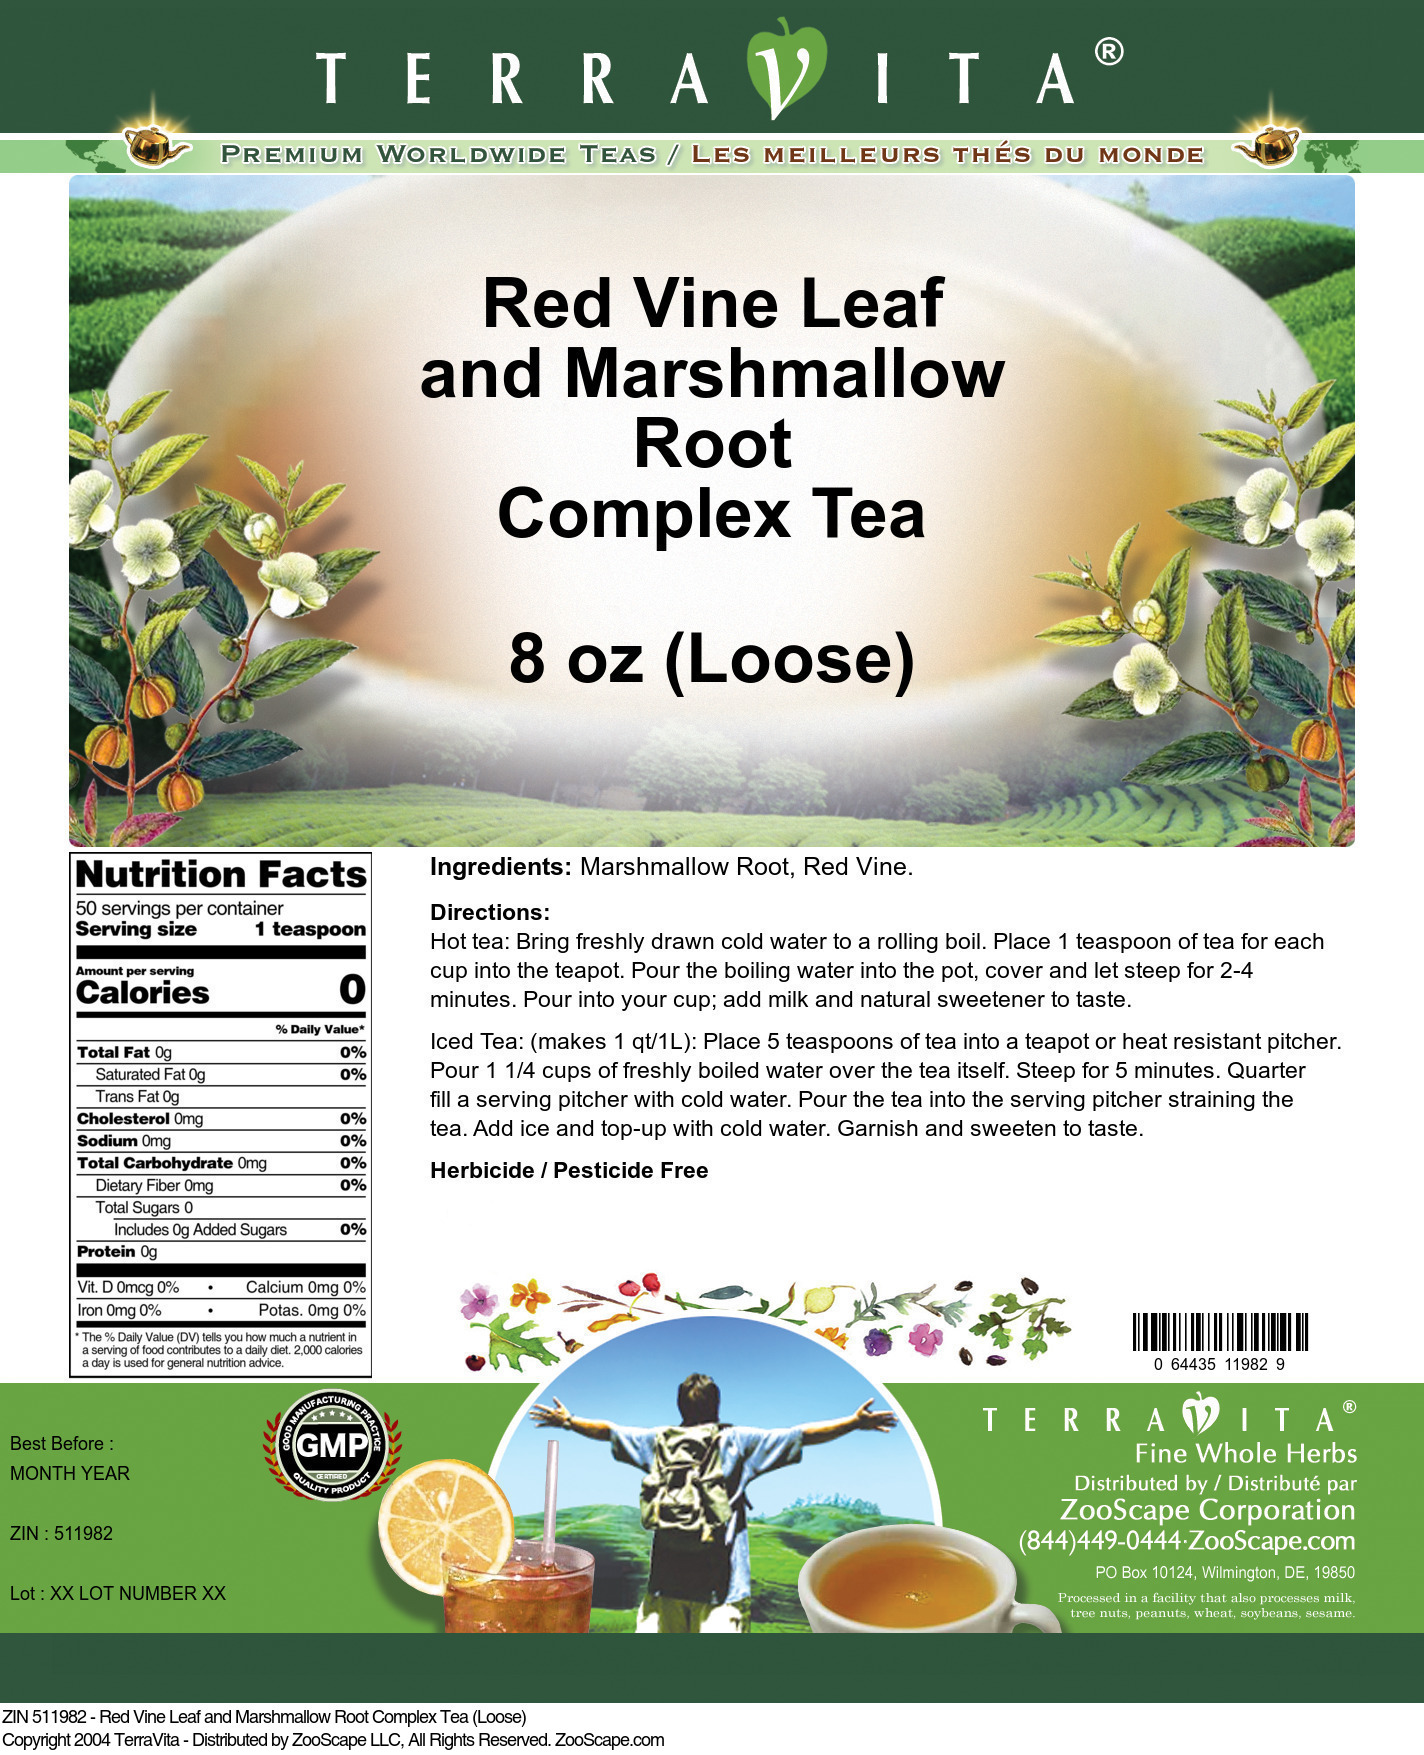 Red Vine Leaf and Marshmallow Root Complex Tea (Loose) - Label